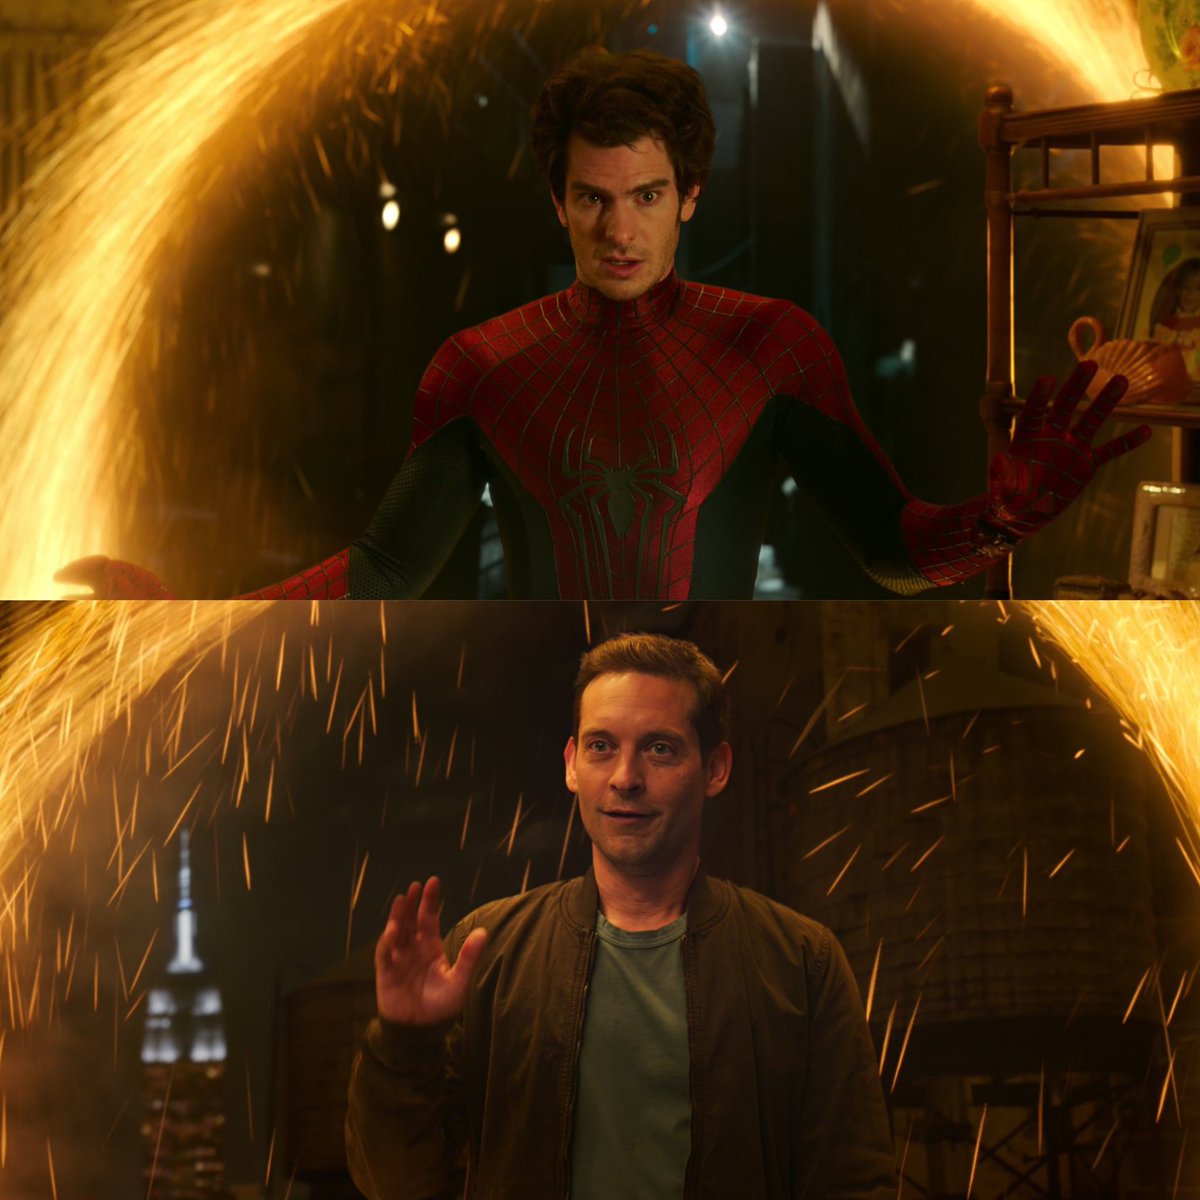 RT @blurayangel: “Andrew Garfield and Tobey Maguire are not in Spider-Man: No Way Home.” https://t.co/Me4e1Y2mEI